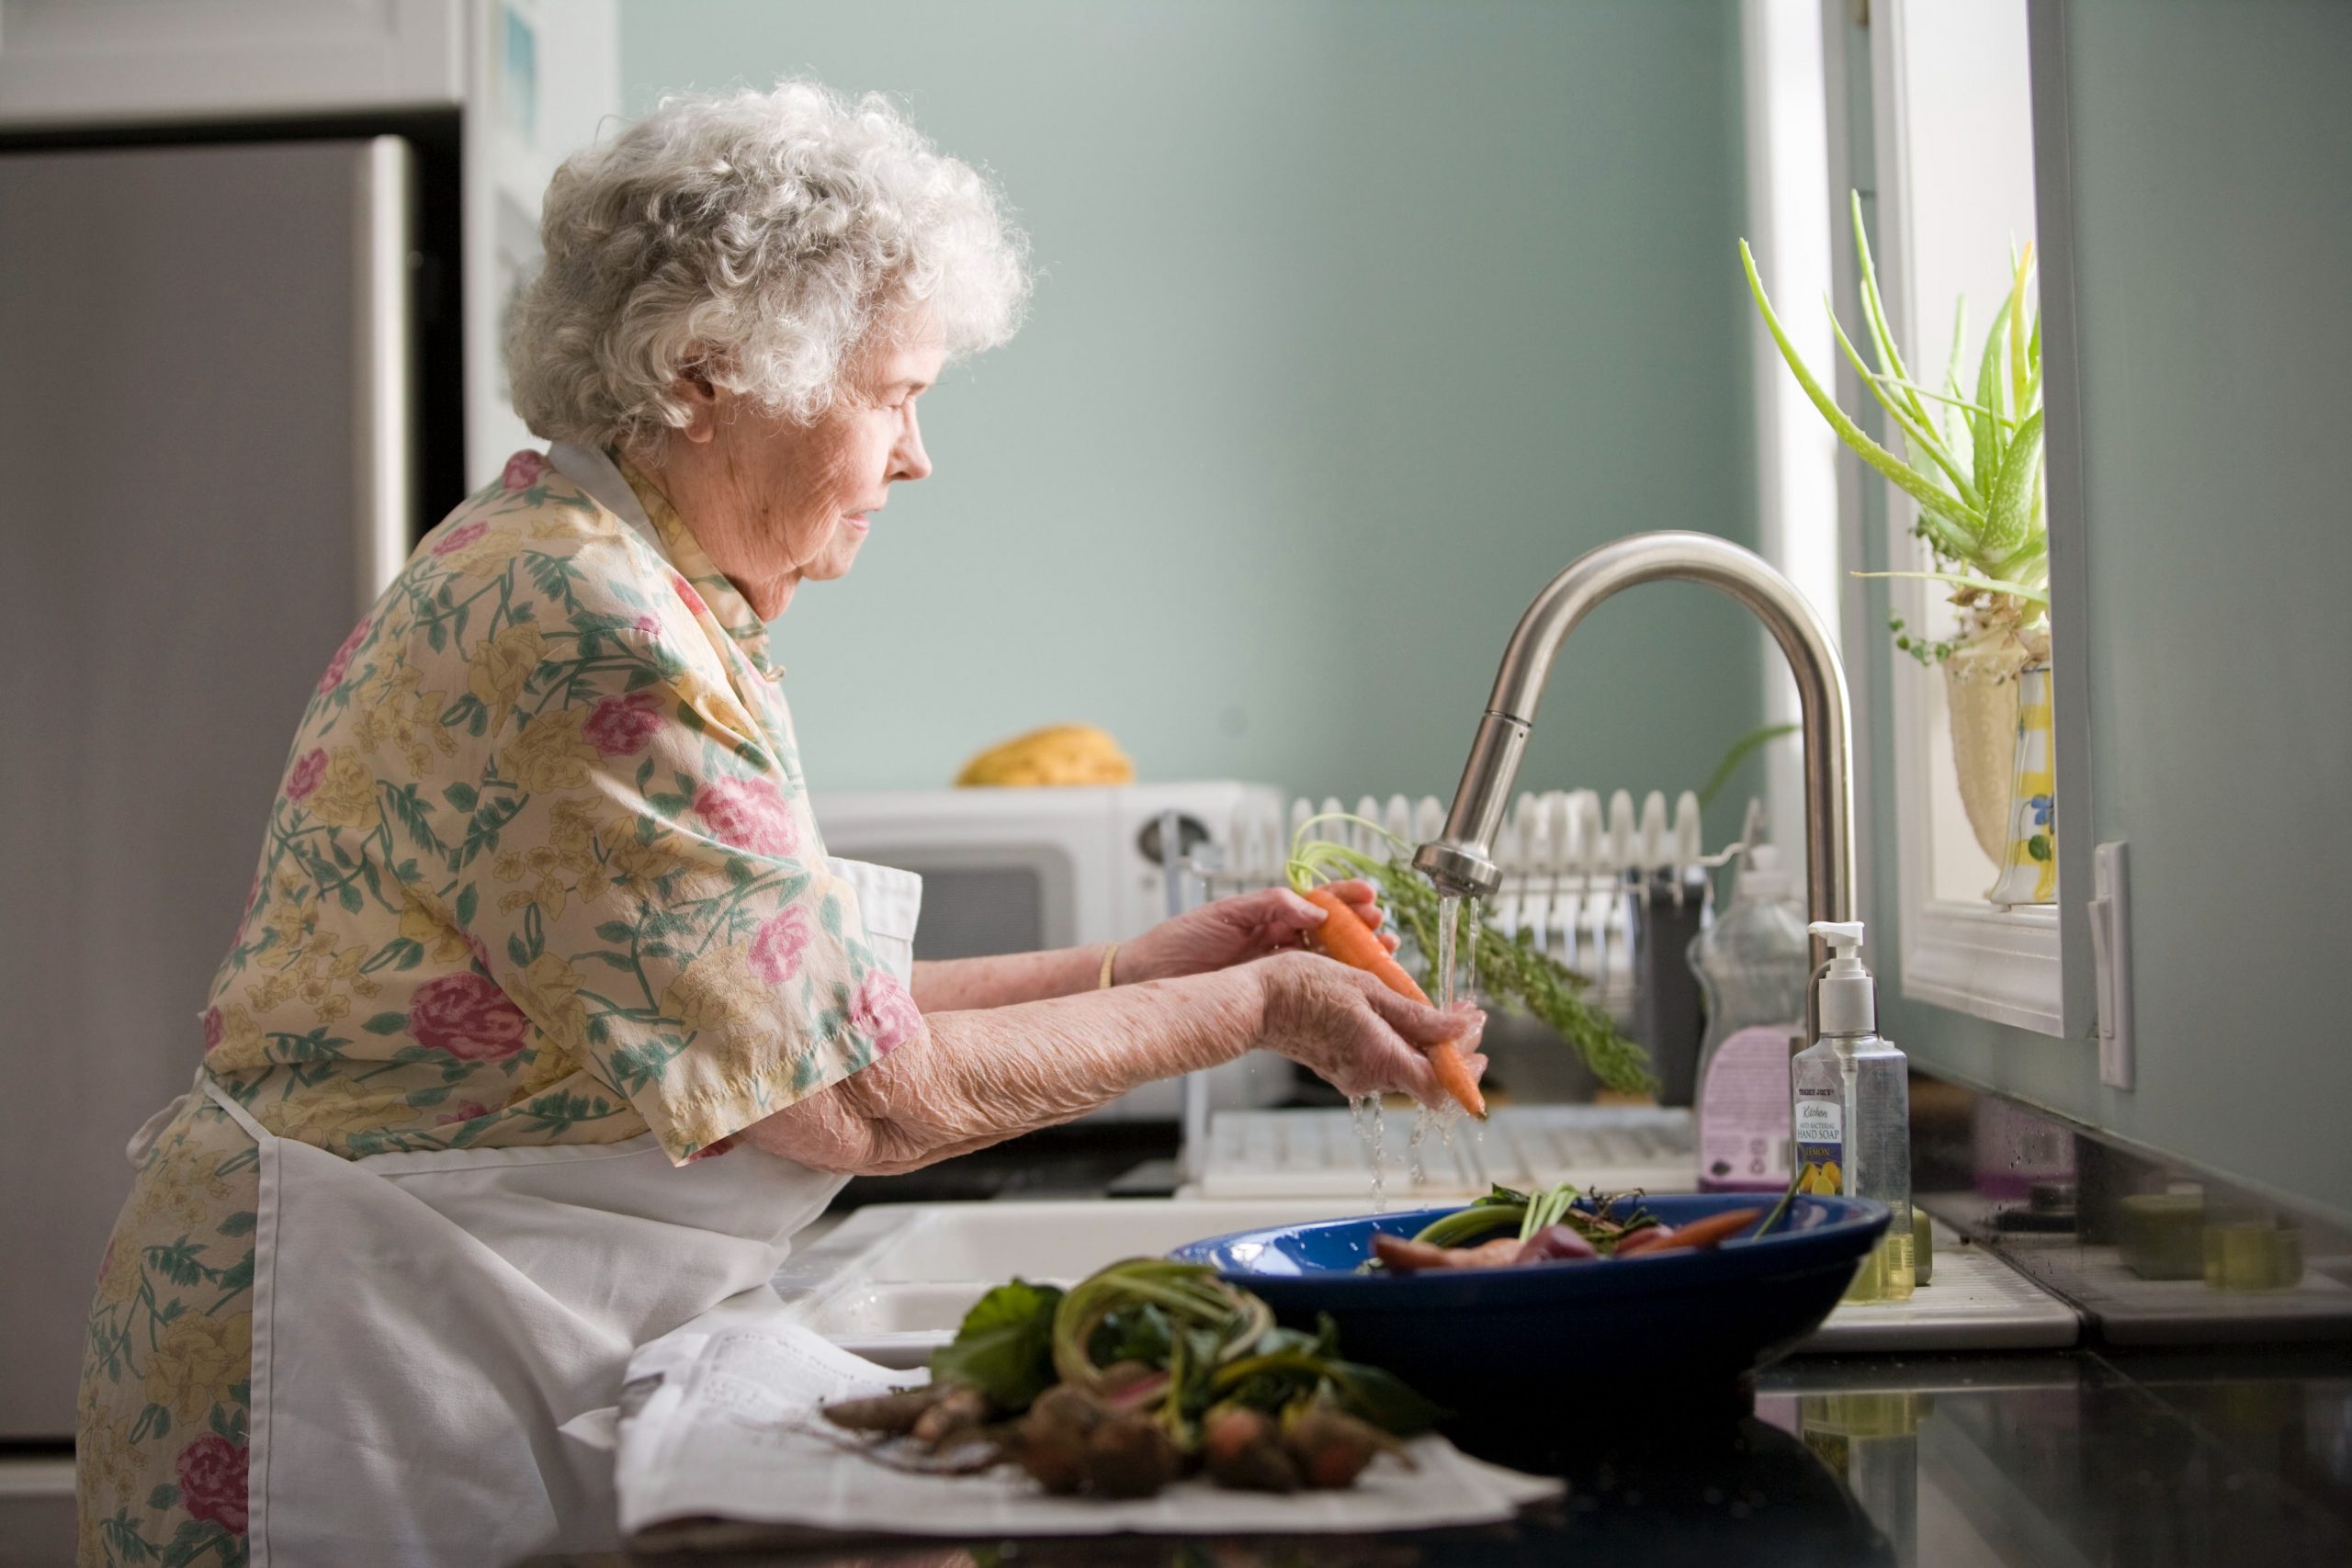 Woman cleaning vegetables in the sink preparing them for dinner